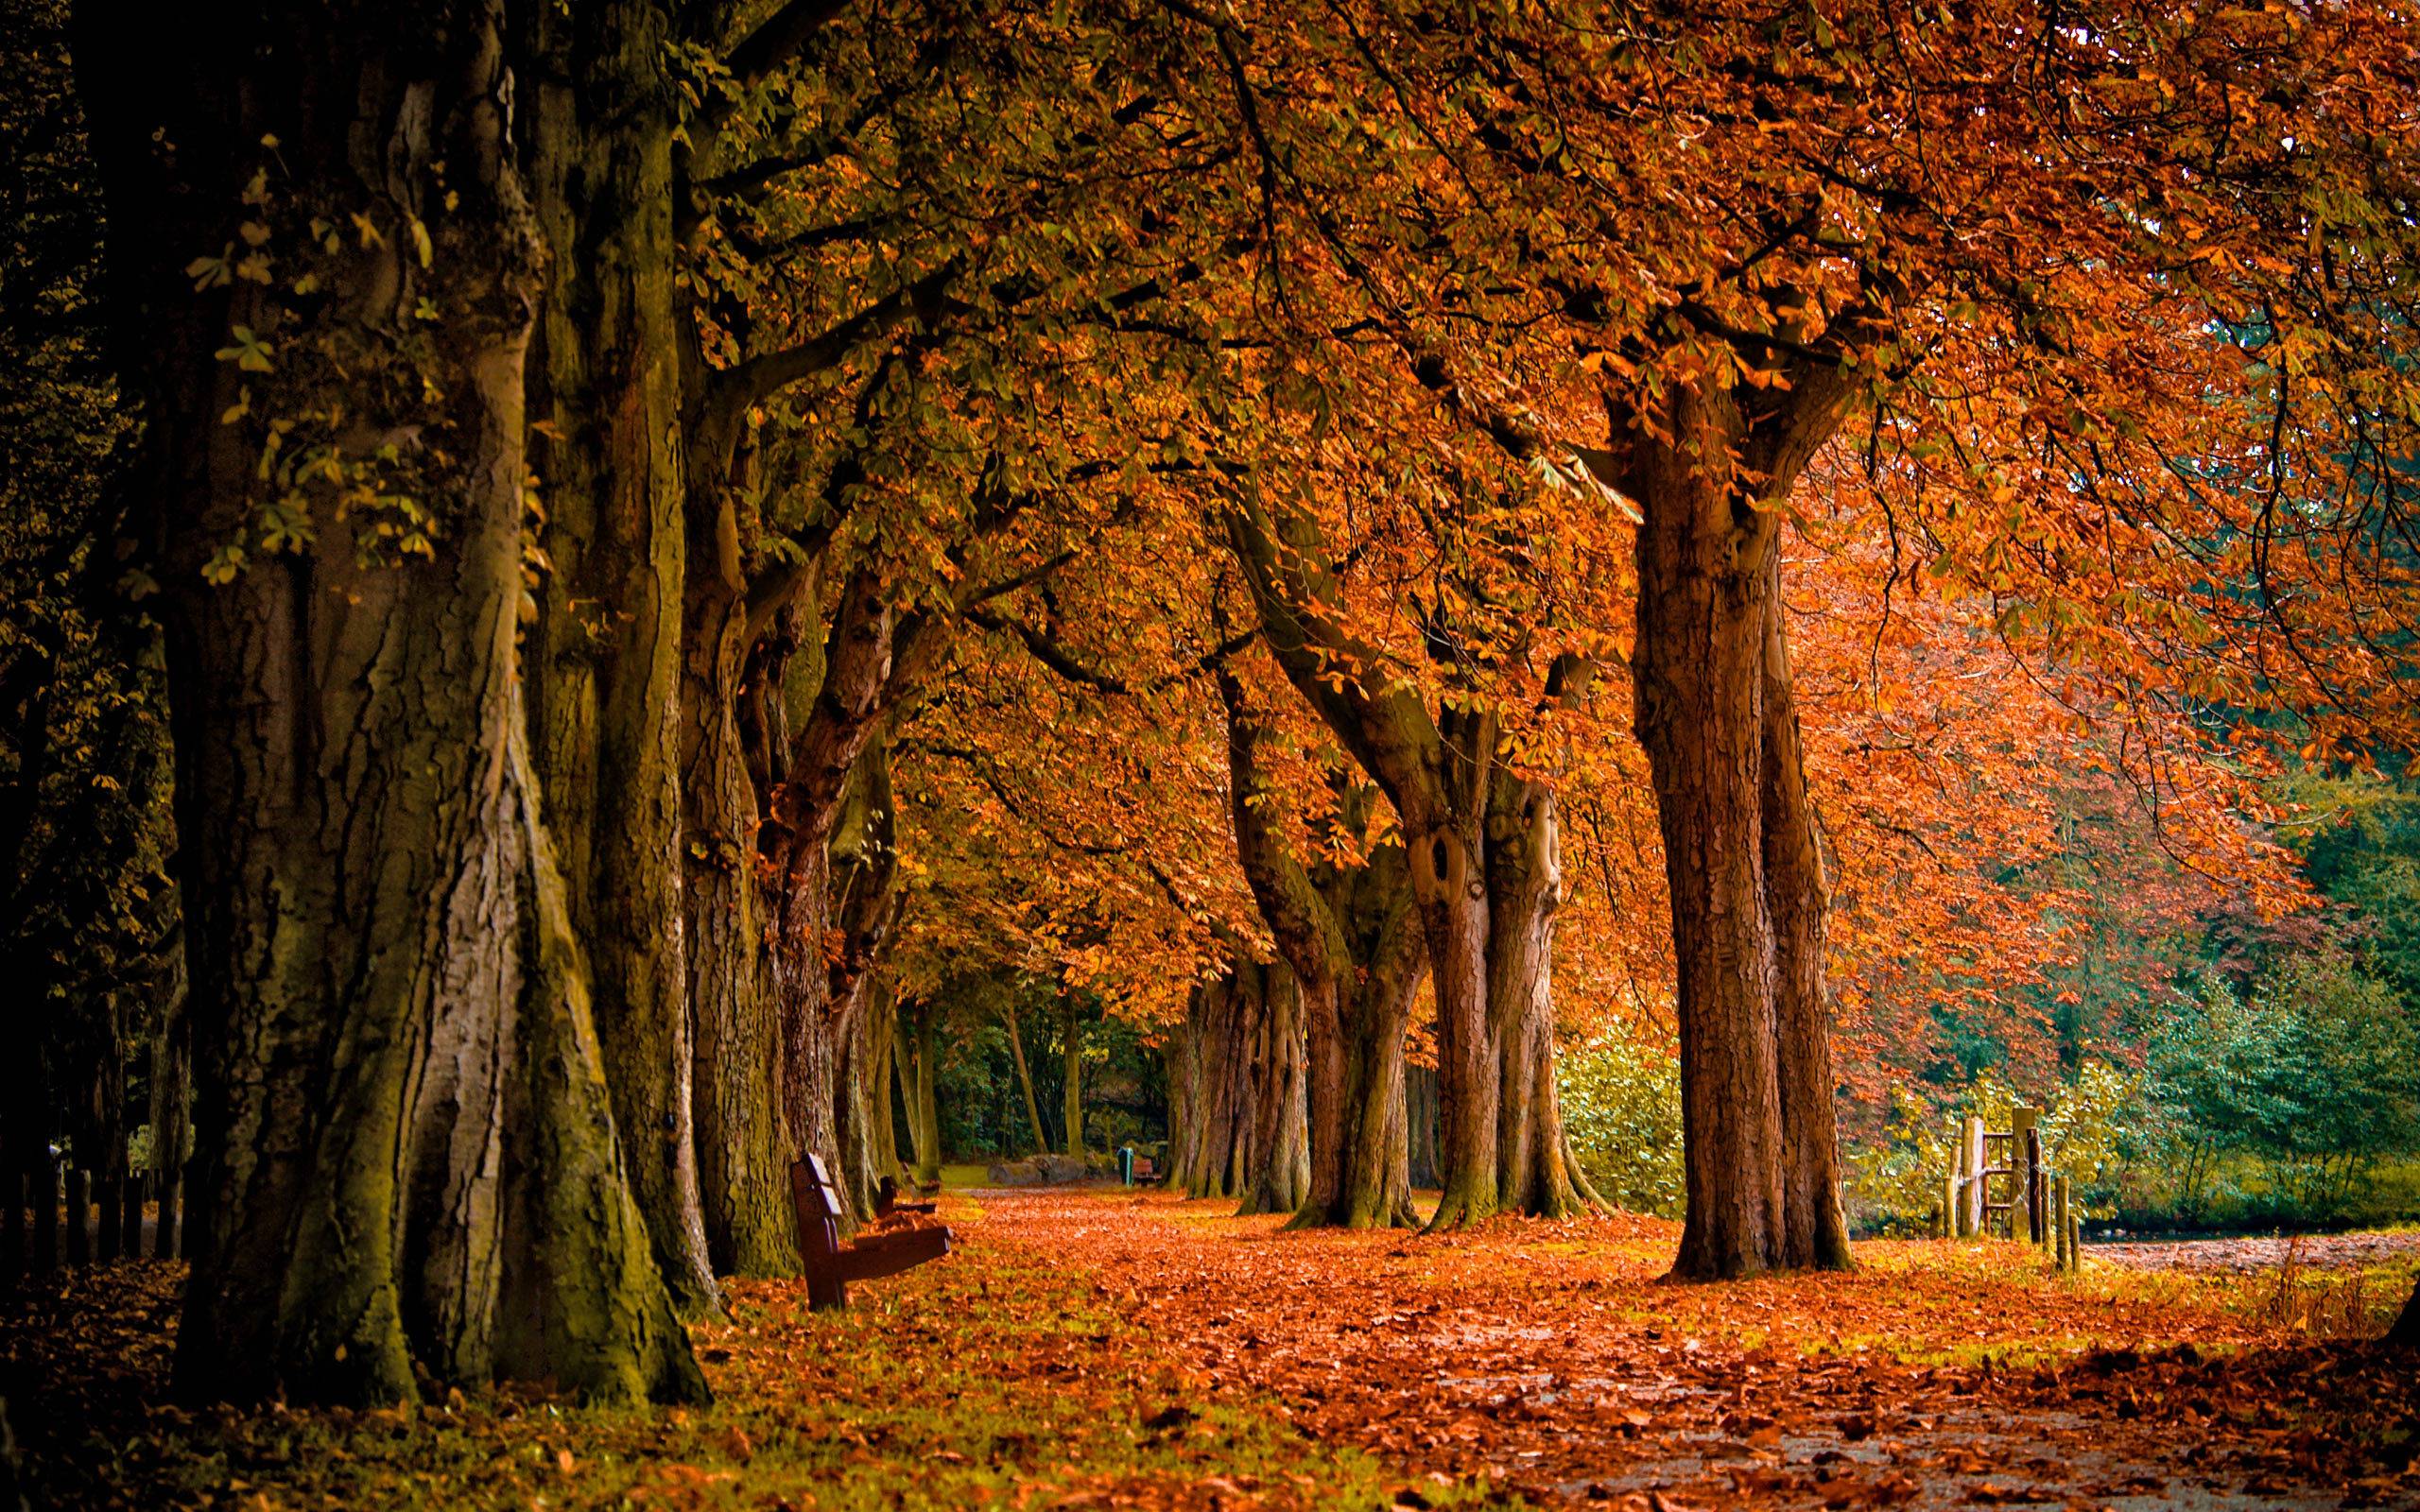 Awe Inspiring Autumn Wallpaper 2560x1600PX Significant Free